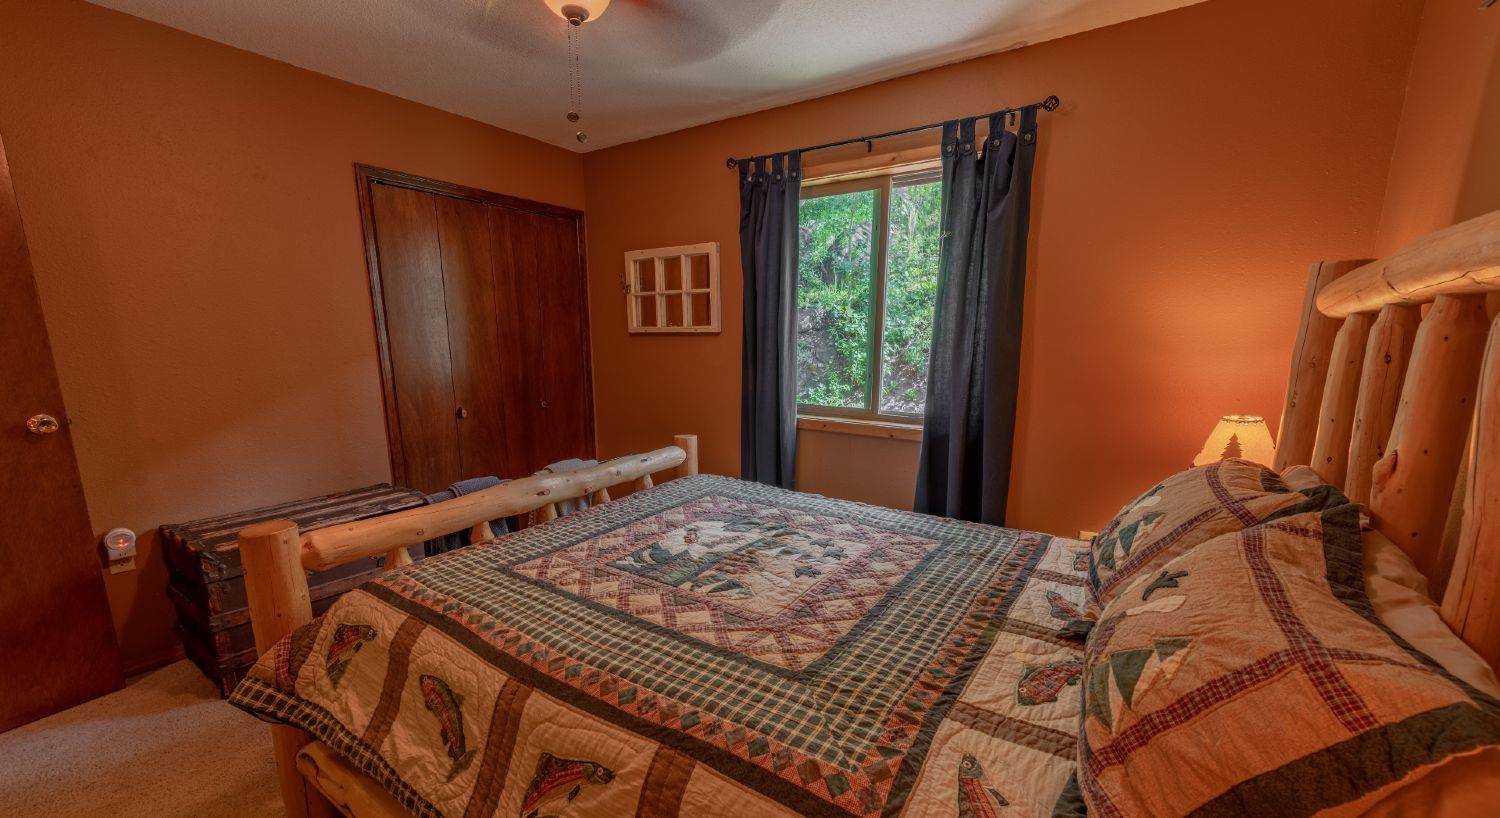 Guest bedroom with a queen size log bed with a charming quilt with fish; brown walls.